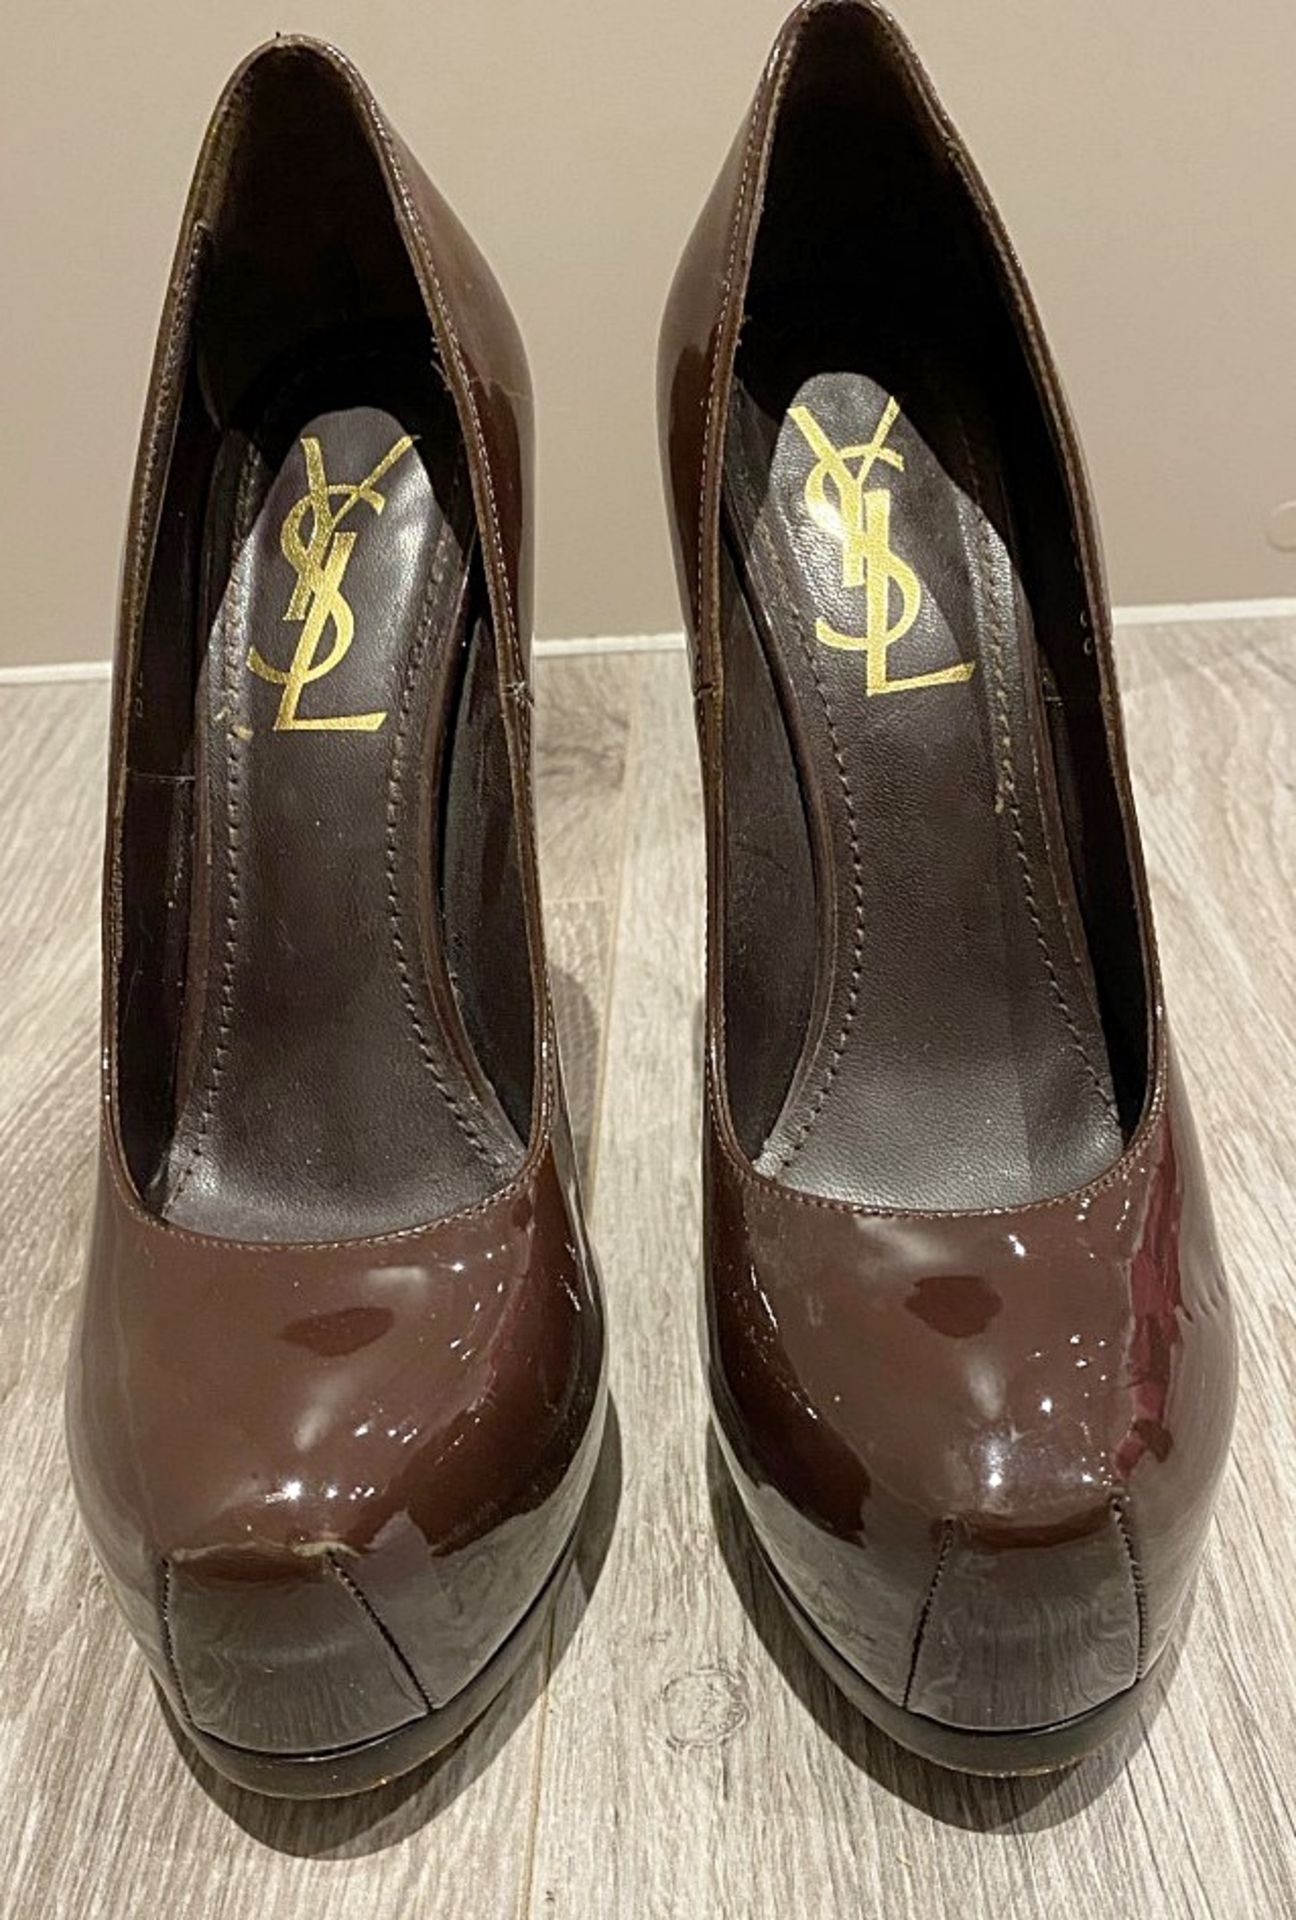 1 x Pair Of Genuine YSL High Heel Shoes In Brown - Size: 36 - Preowned in Good Condition - Ref: LOT4 - Image 2 of 4